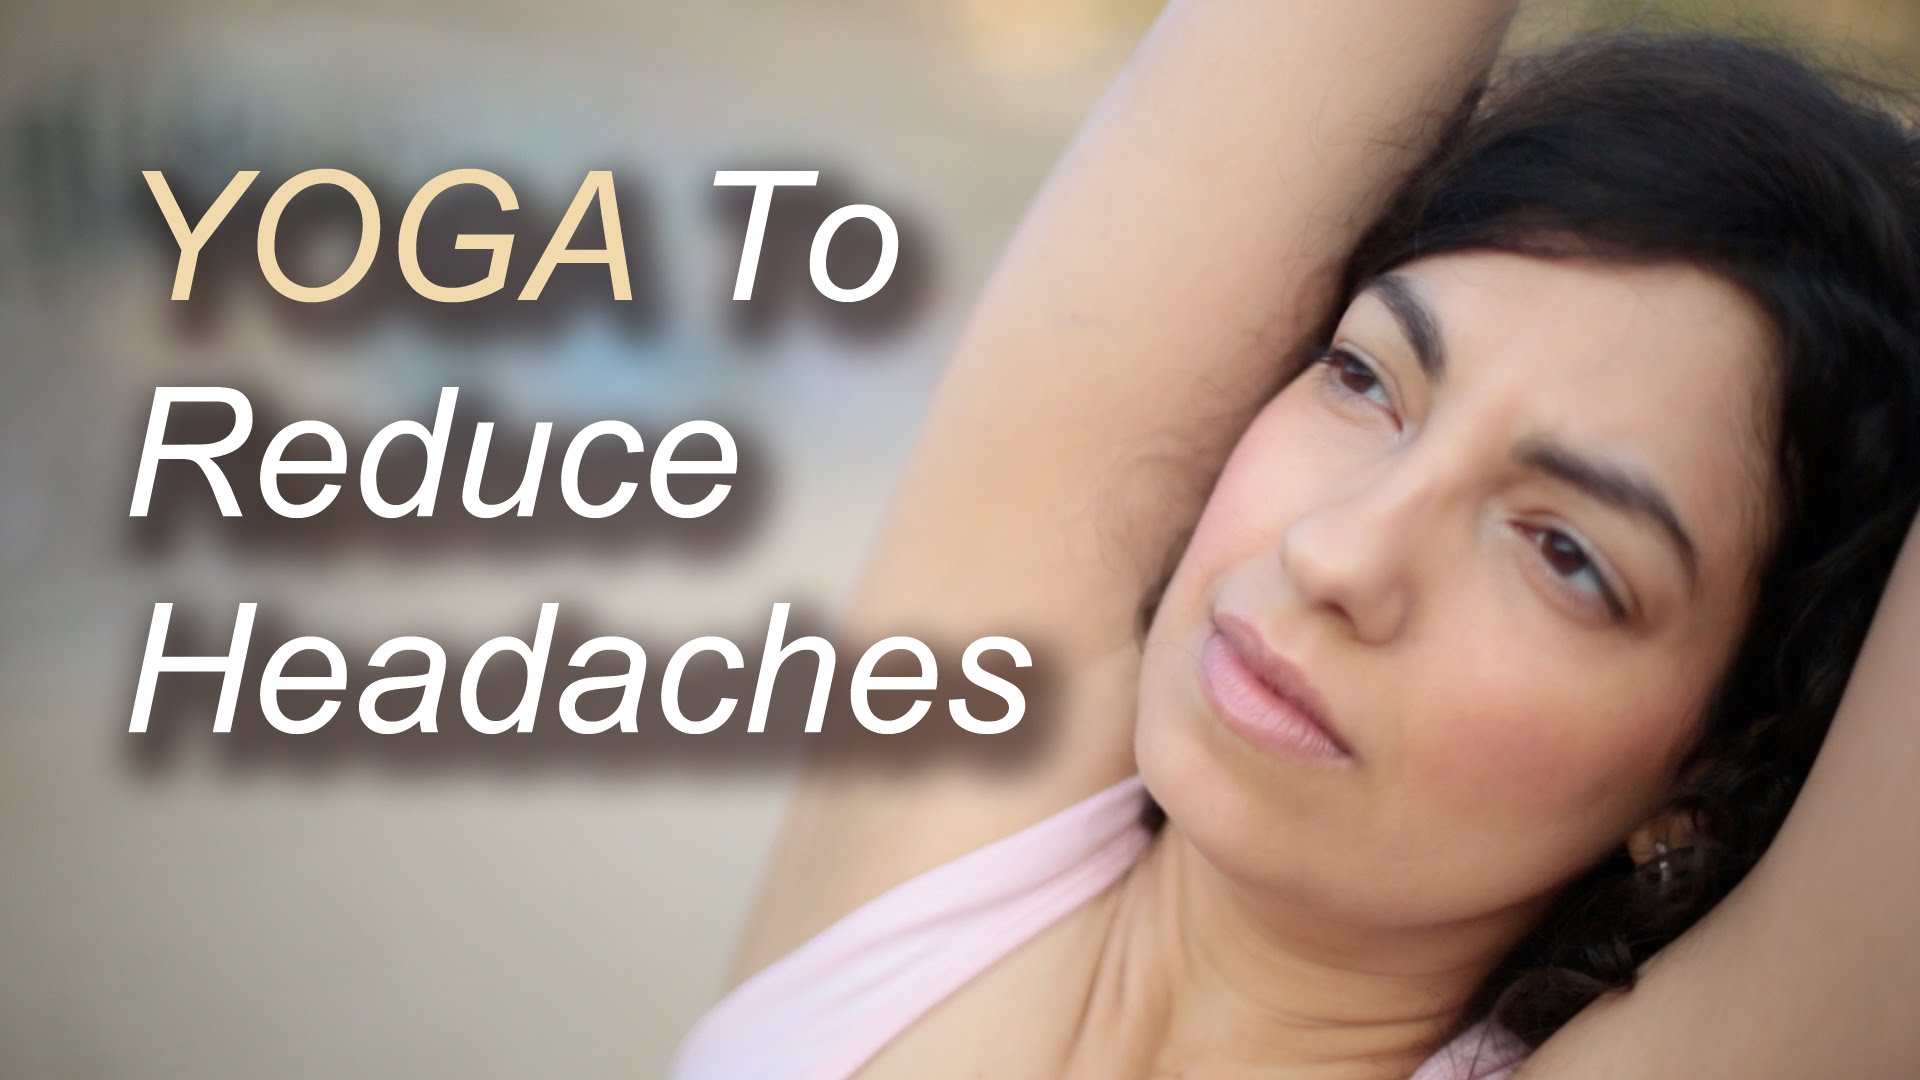 Yoga Poses : 5 Yoga Poses to Reduce Headaches - About Yoga Blog | Home